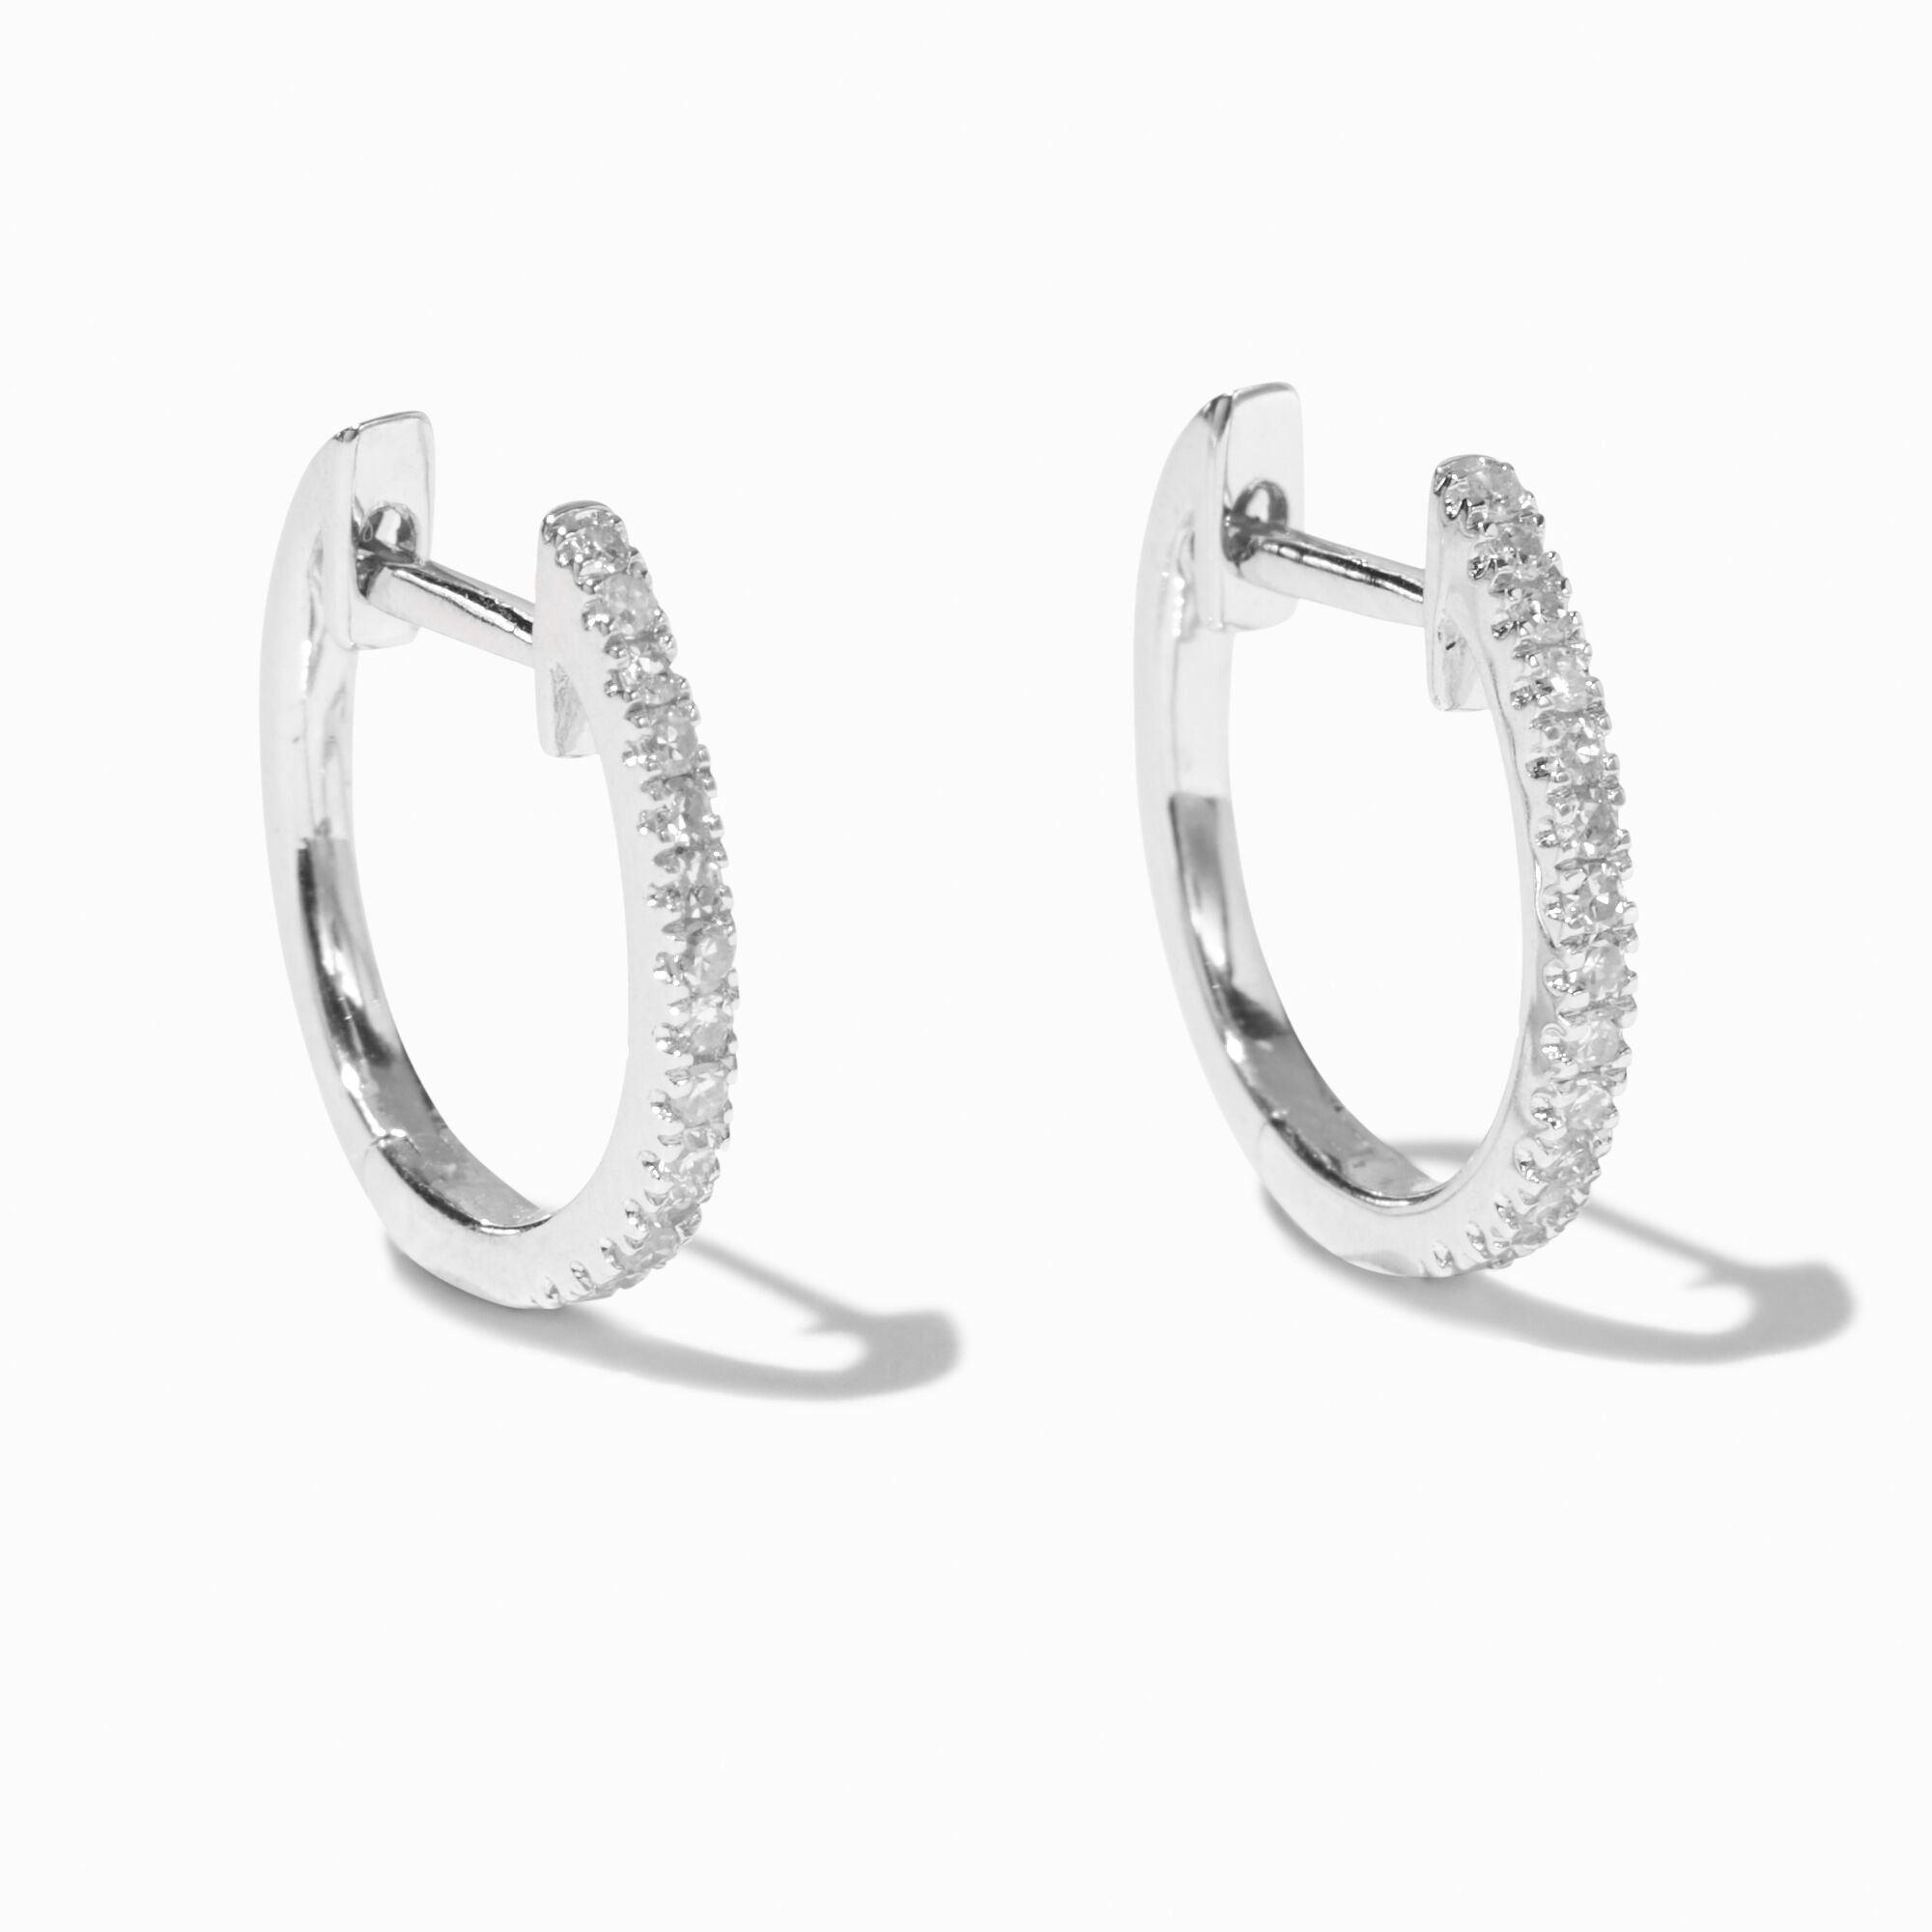 View C Luxe By Claires 110 Ct Tw Laboratory Grown Diamond 10MM Embellished Hoop Earrings Silver information